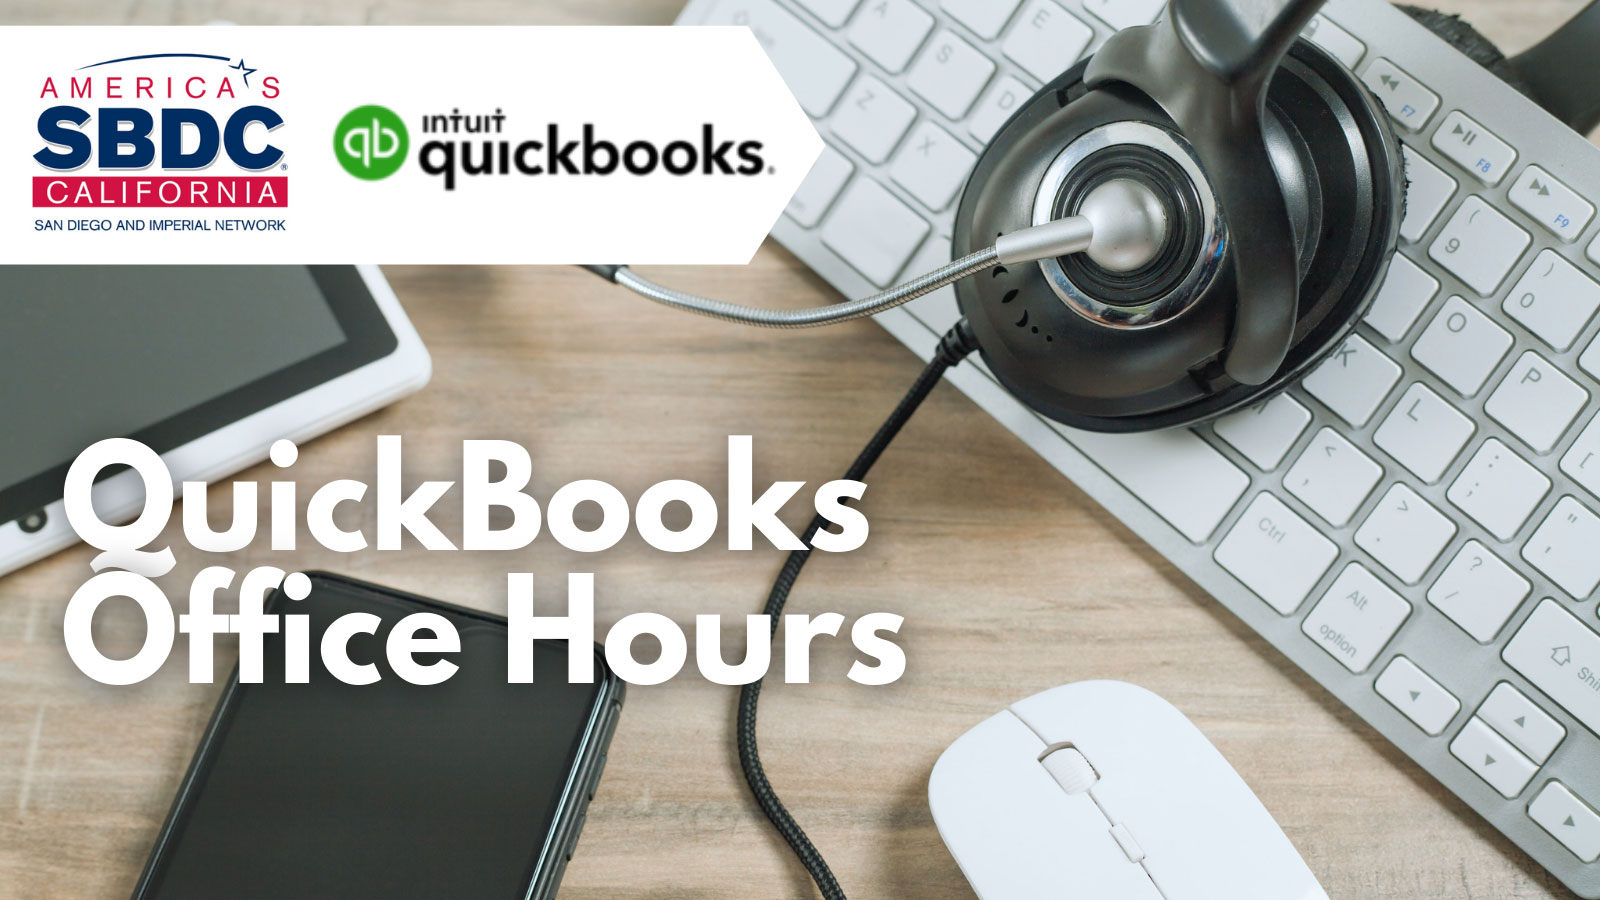 Intuit QuickBooks Office Hours in English with SBDC